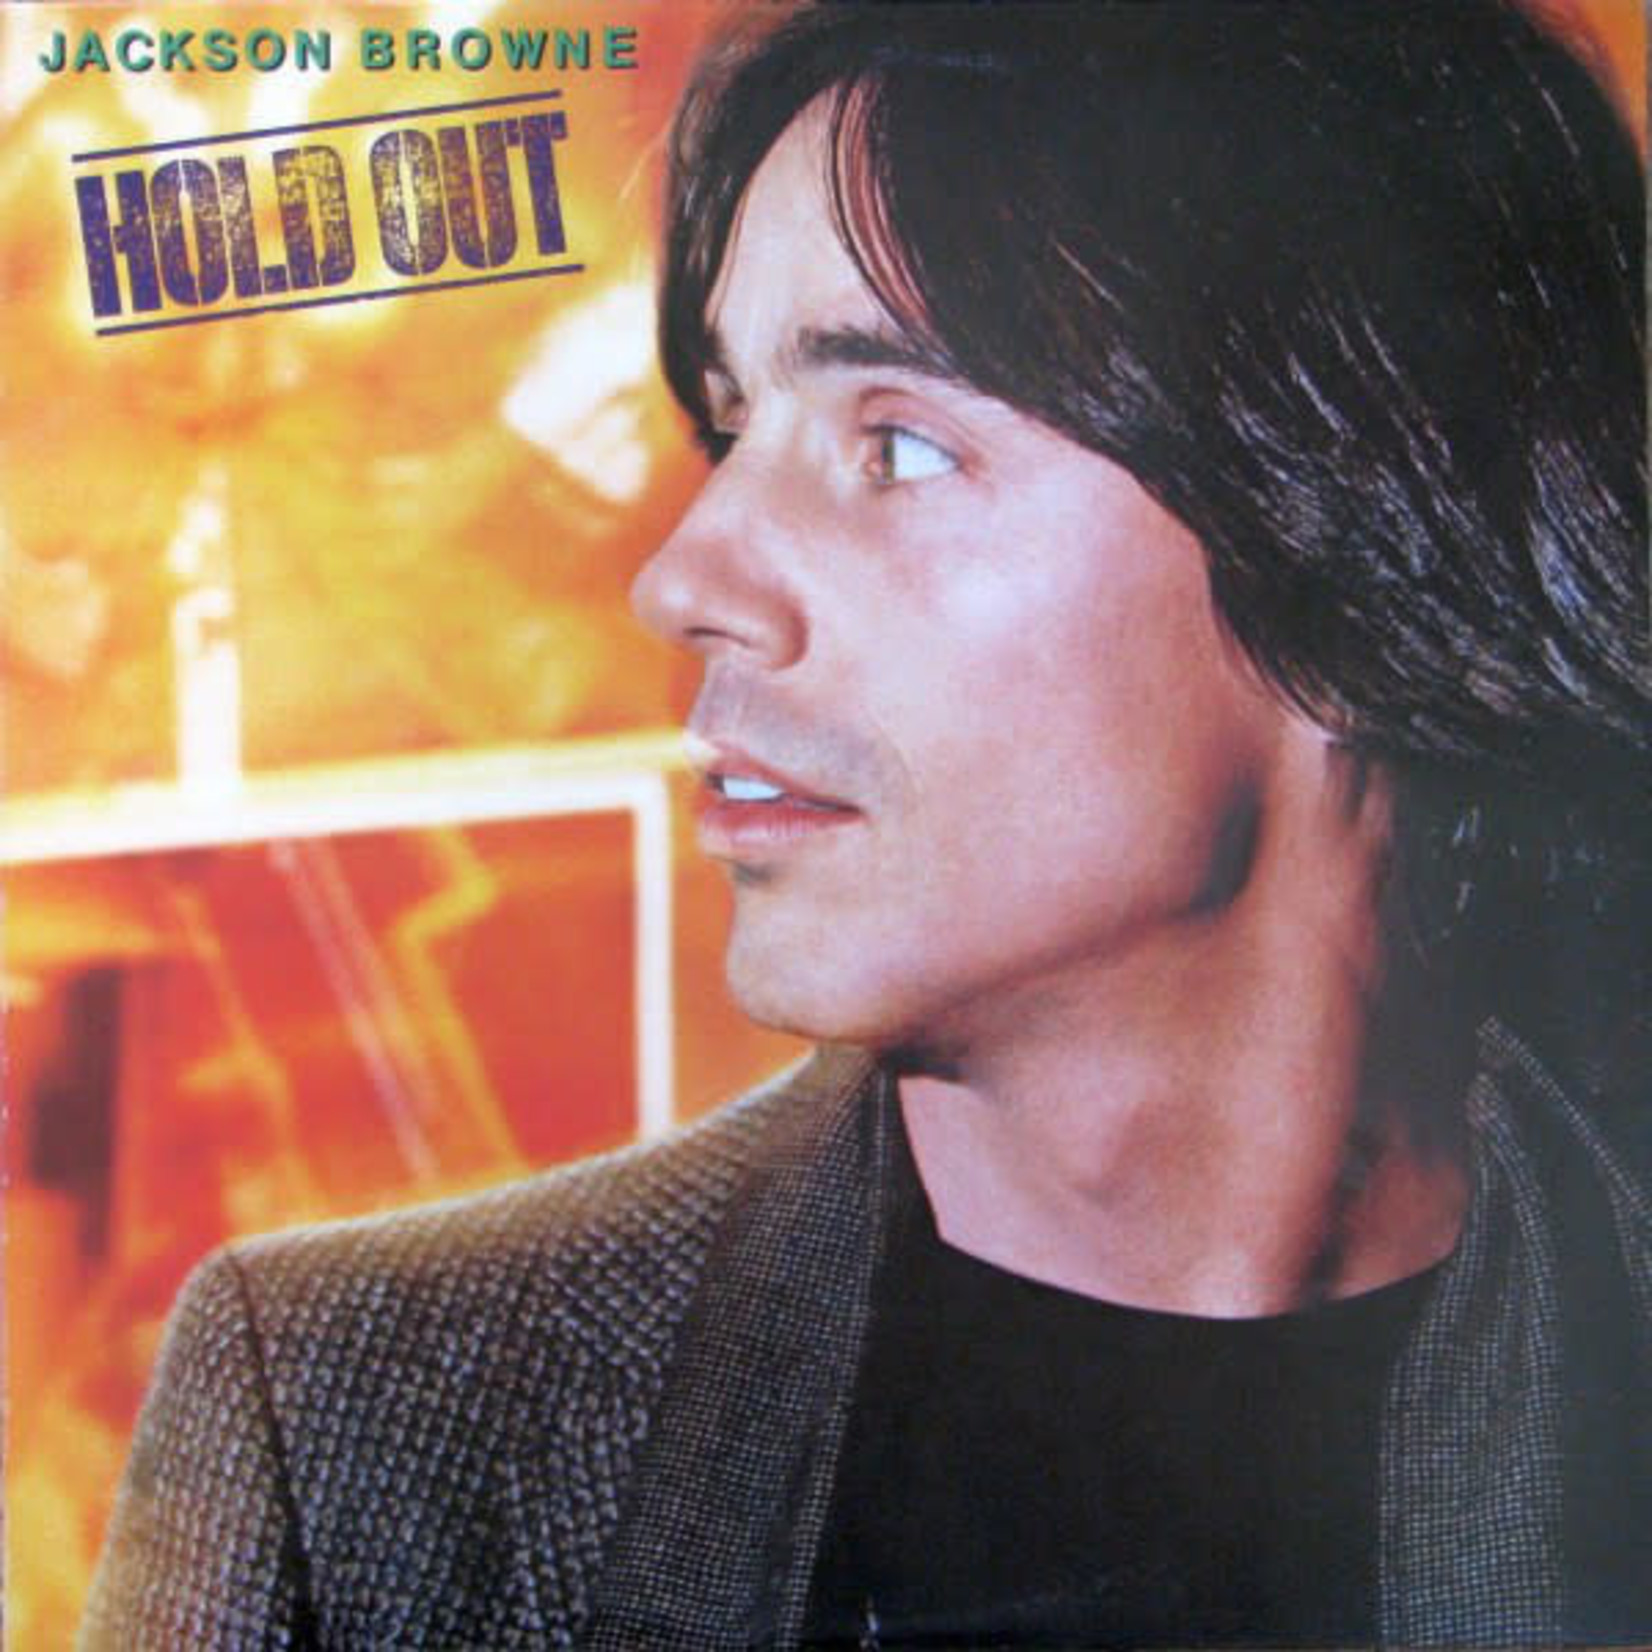 Jackson Browne Jackson Browne – Hold Out (VG)